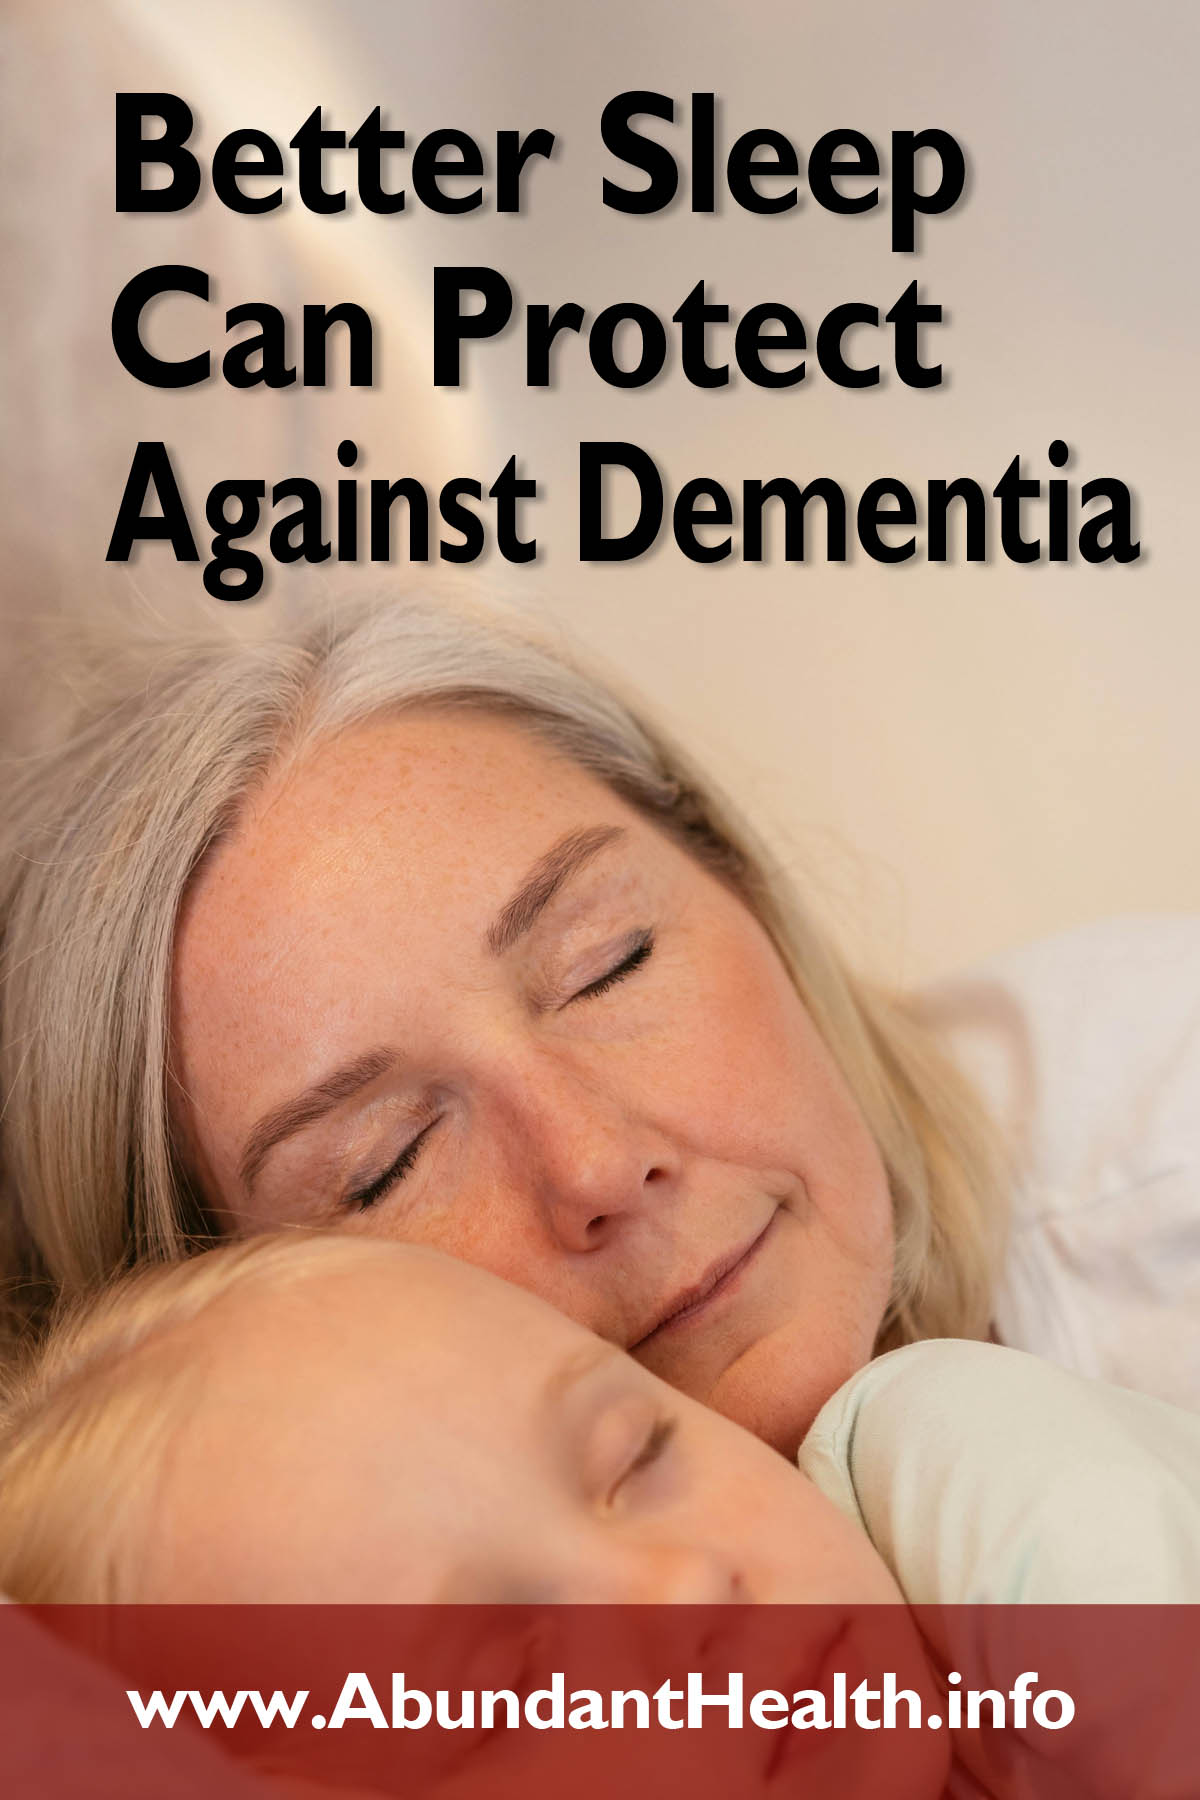 Better Sleep Can Protect Against Dementia